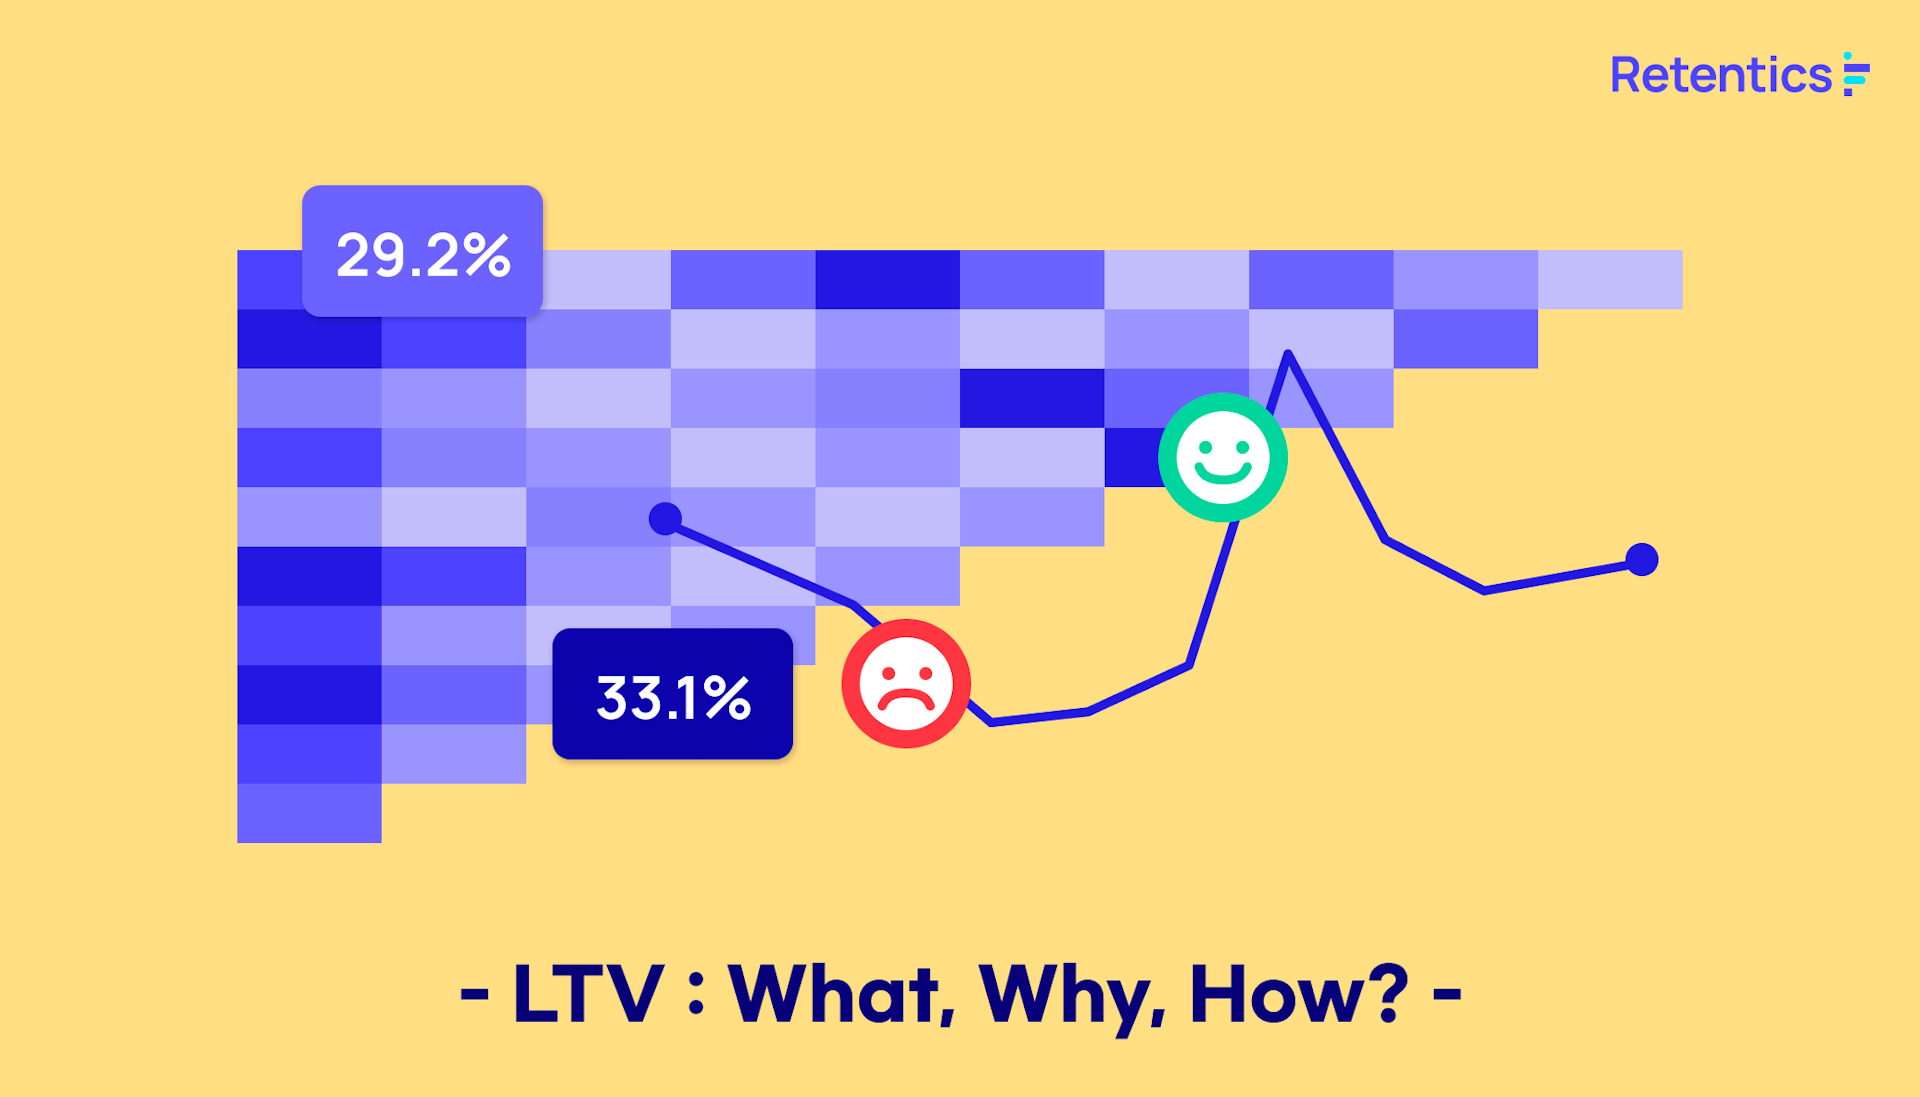 LTV : What, Why, How?